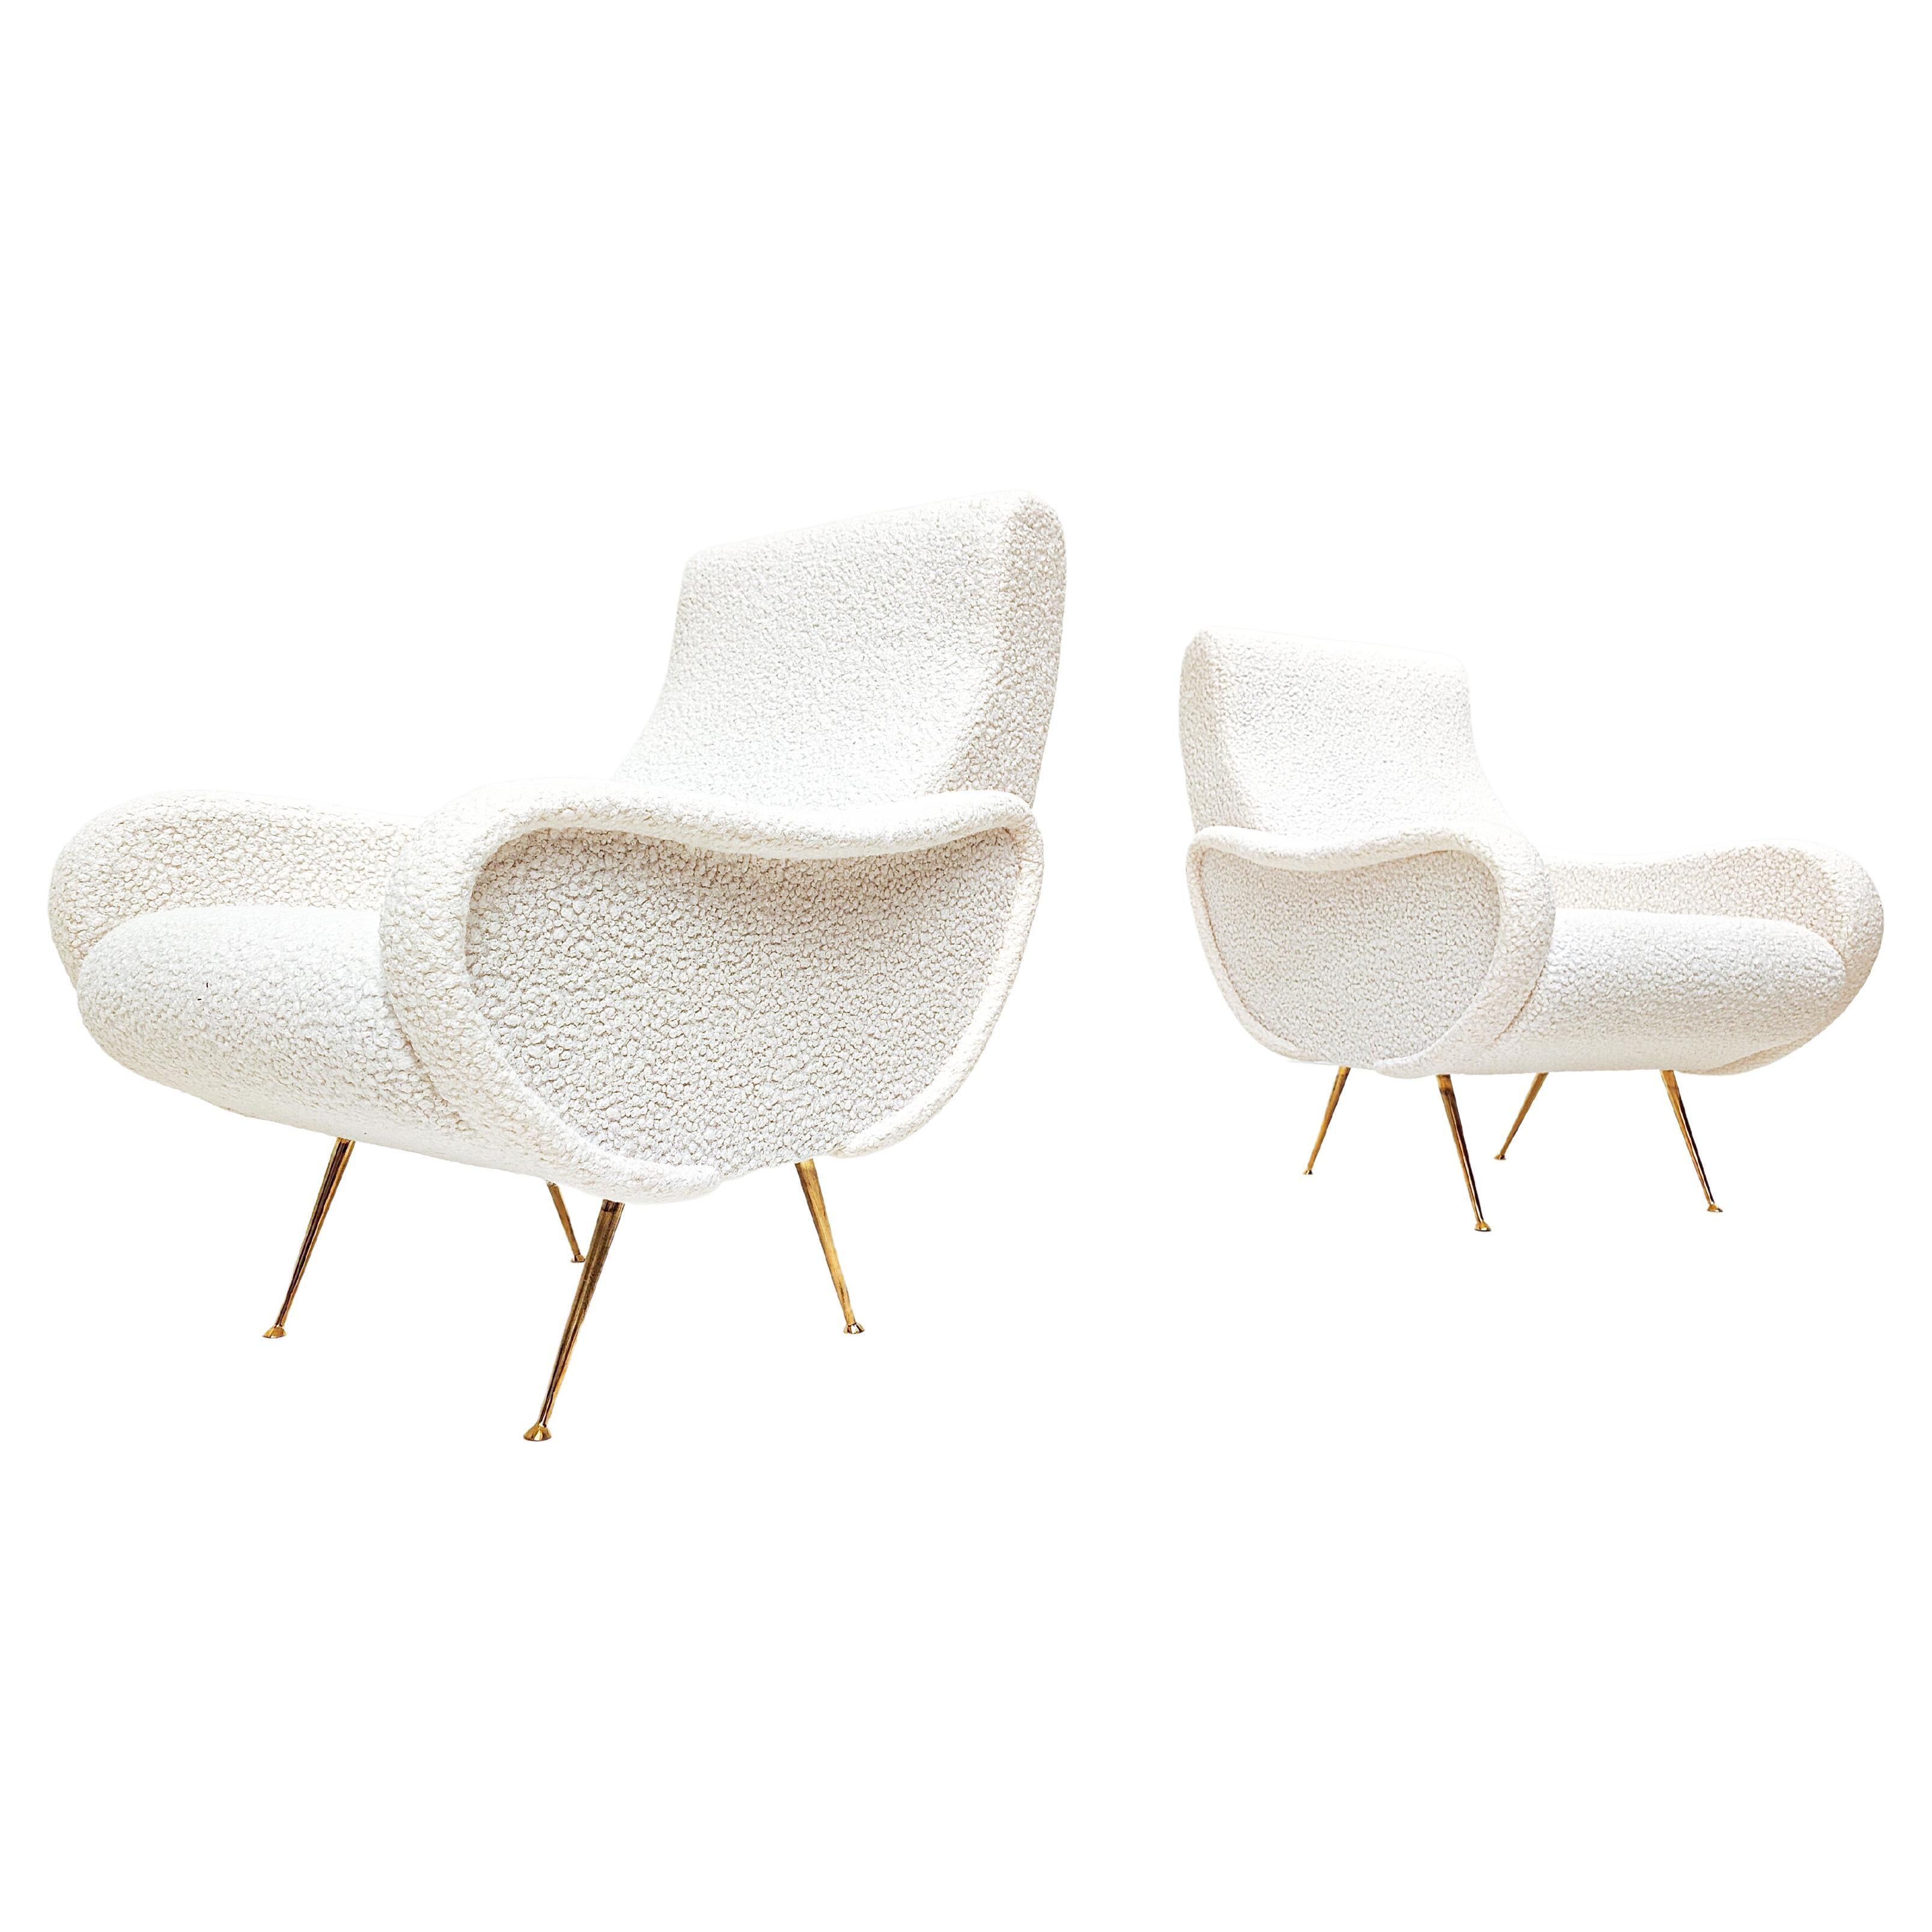 Mid-century Modern Italian Pair of Armchairs, White Boucle Fabric, 1950S For Sale